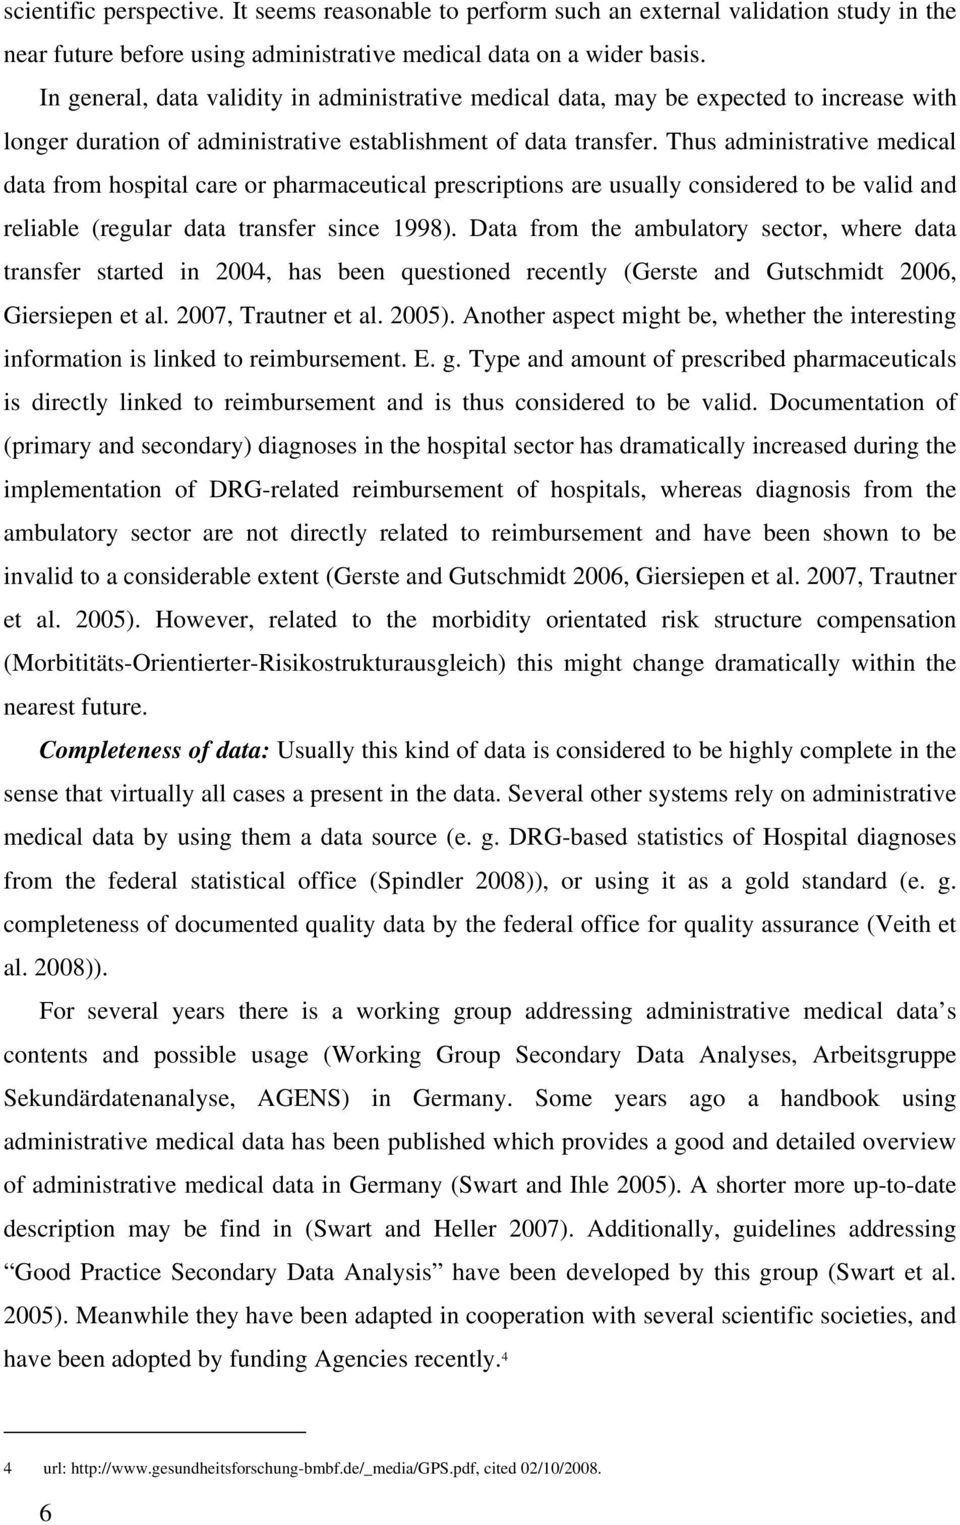 Thus administrative medical data from hospital care or pharmaceutical prescriptions are usually considered to be valid and reliable (regular data transfer since 1998).